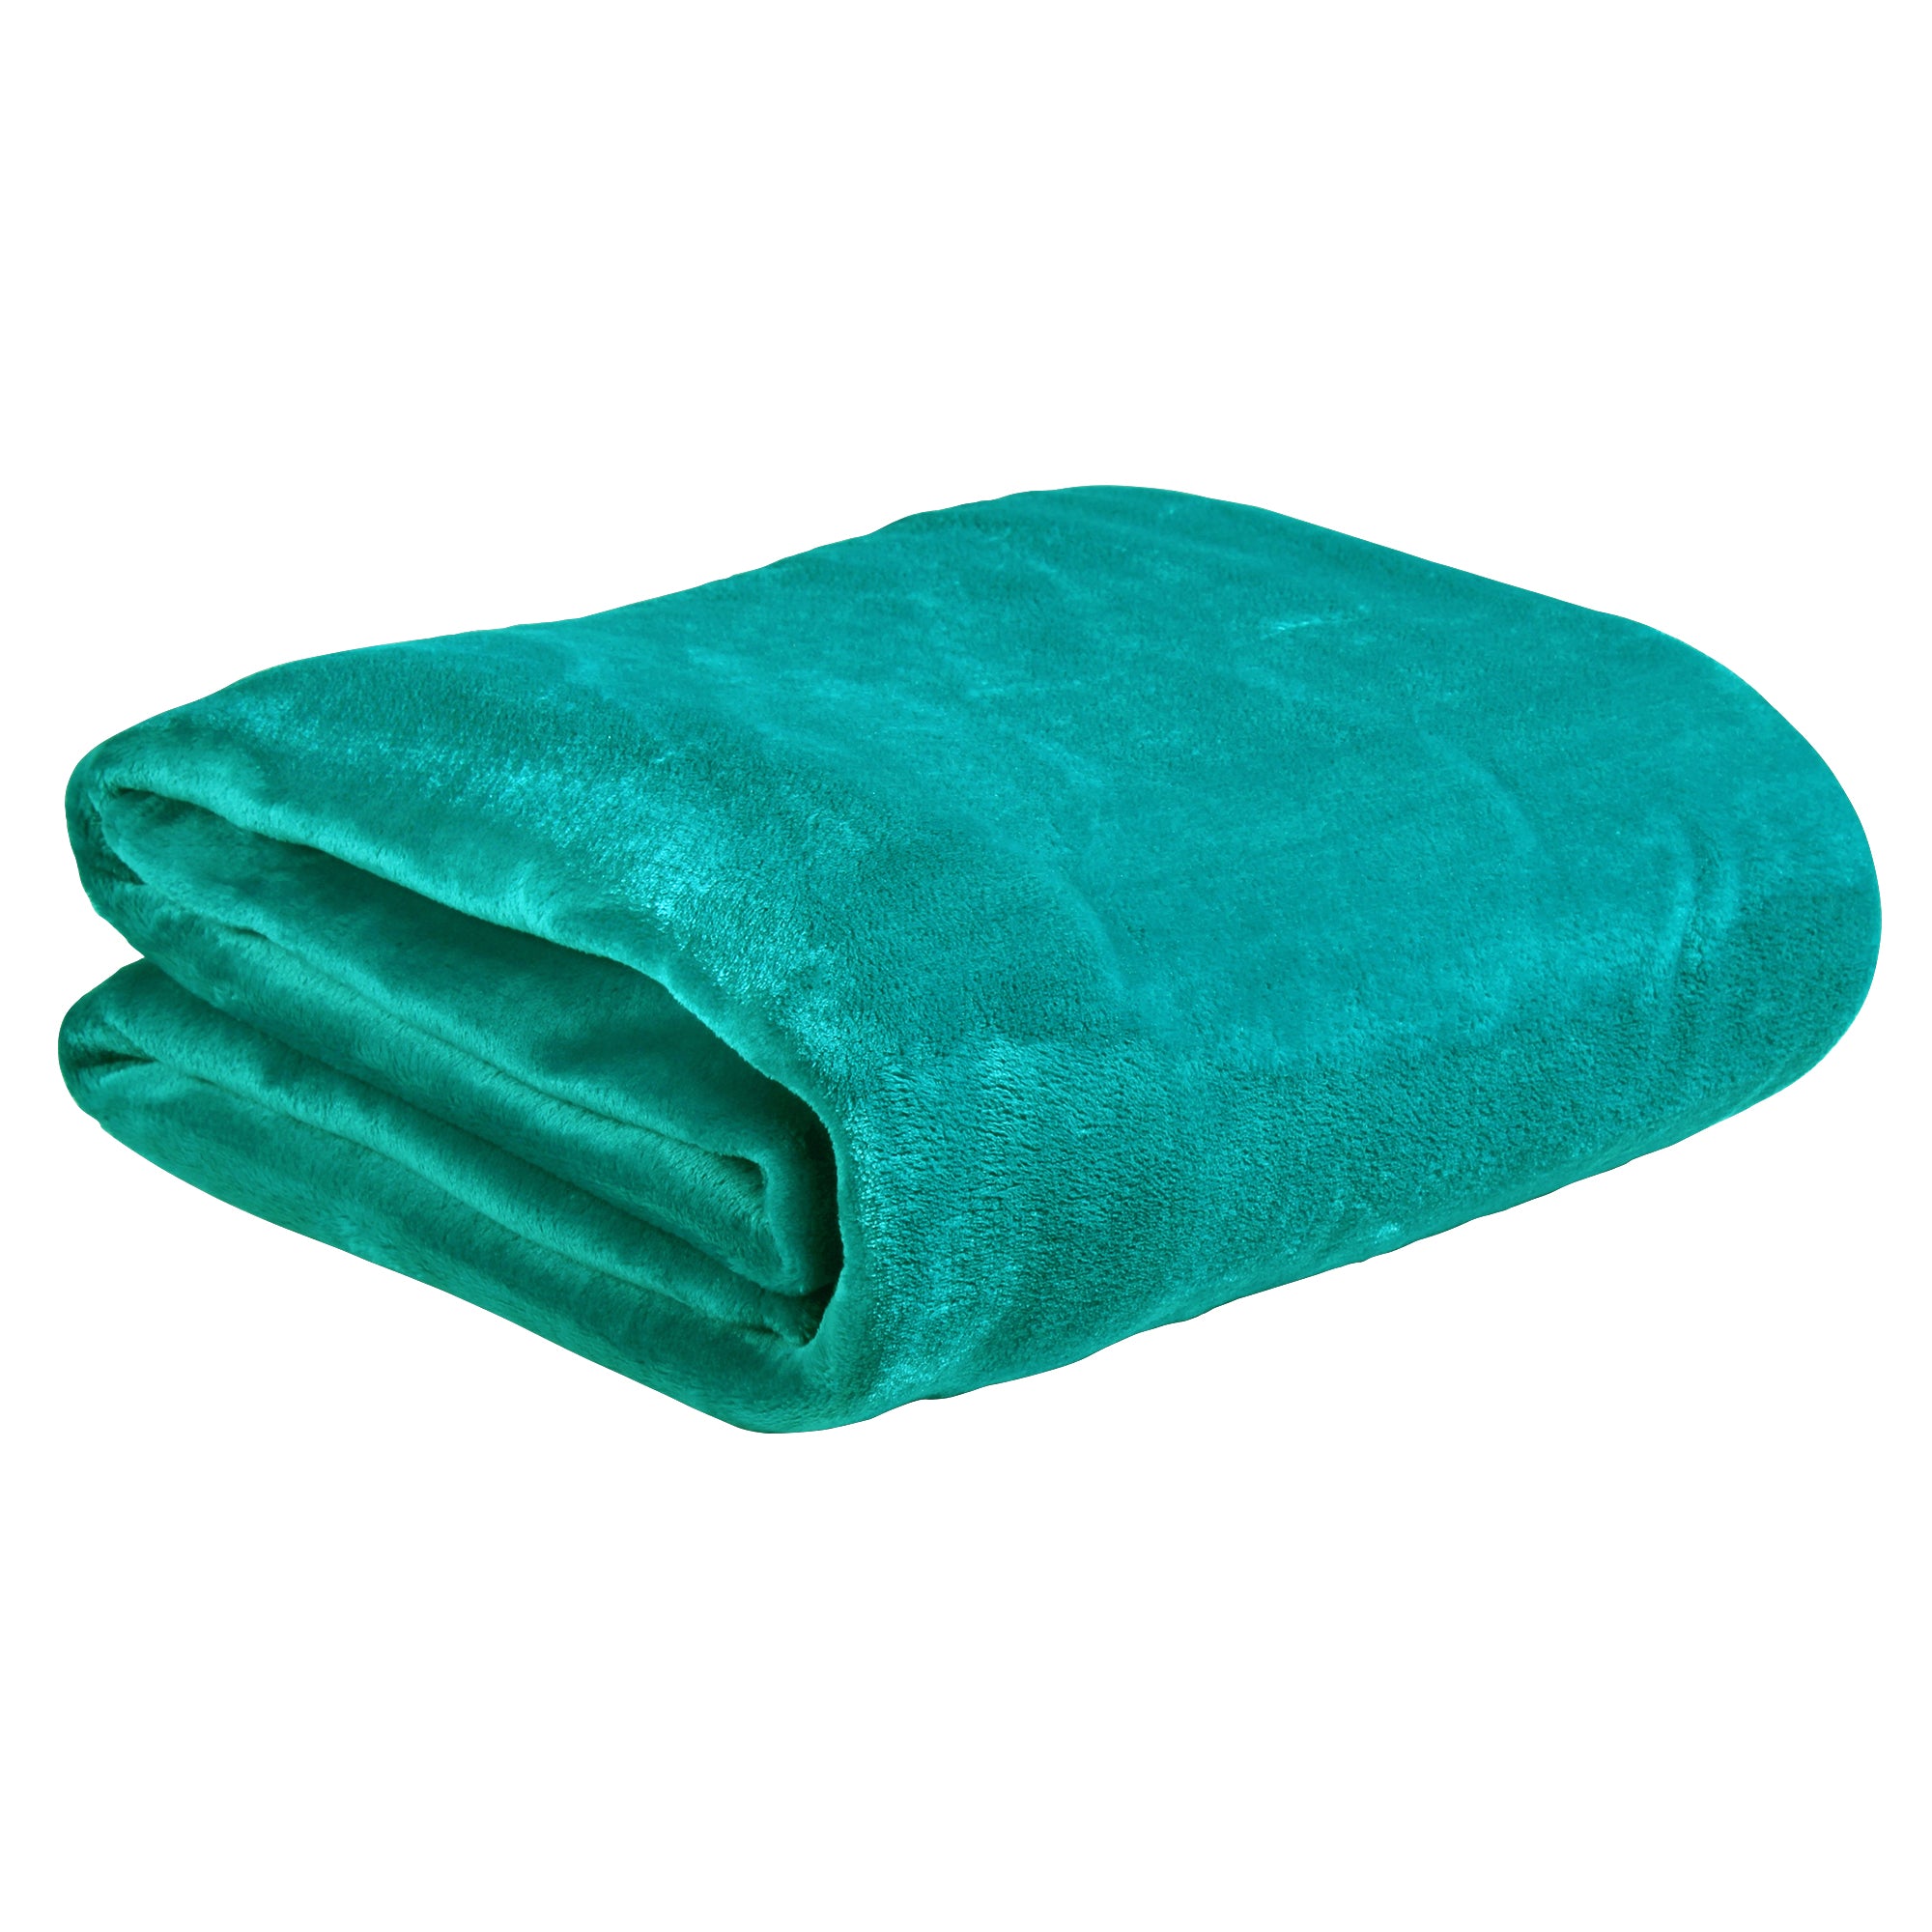 Premium Turqiouse Double Flannel Blanket